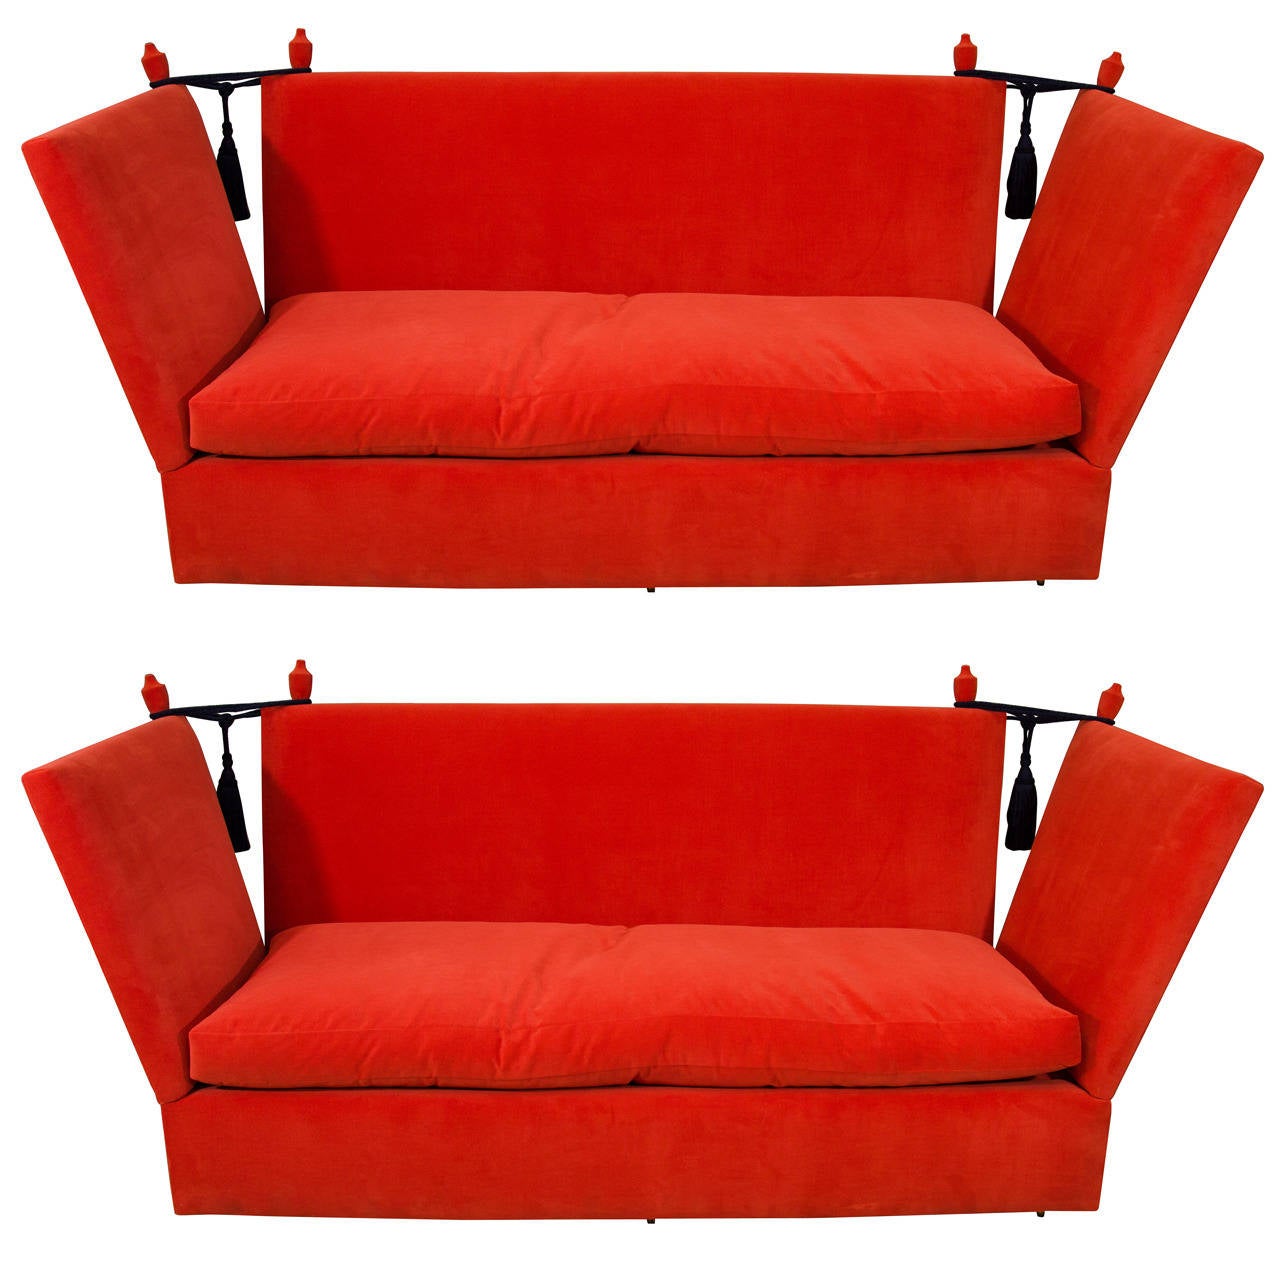 Pair of Knole Sofas from Muncaster Castle, England